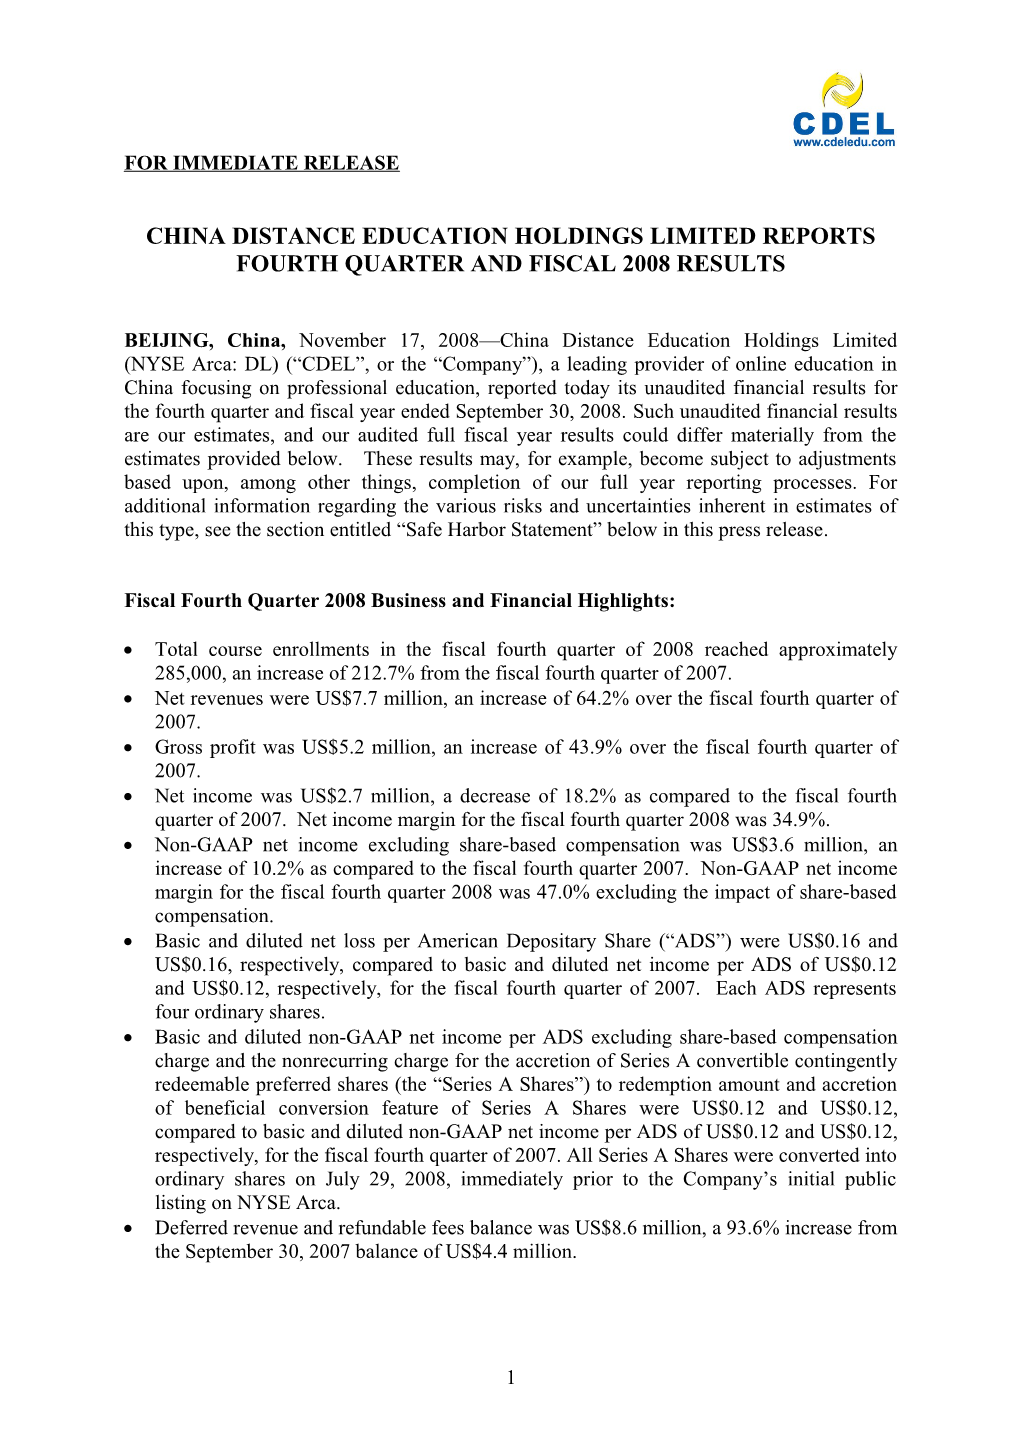 China Distance Education Holdings Limited Reports Fourth Quarter and Fiscal 2008 Results